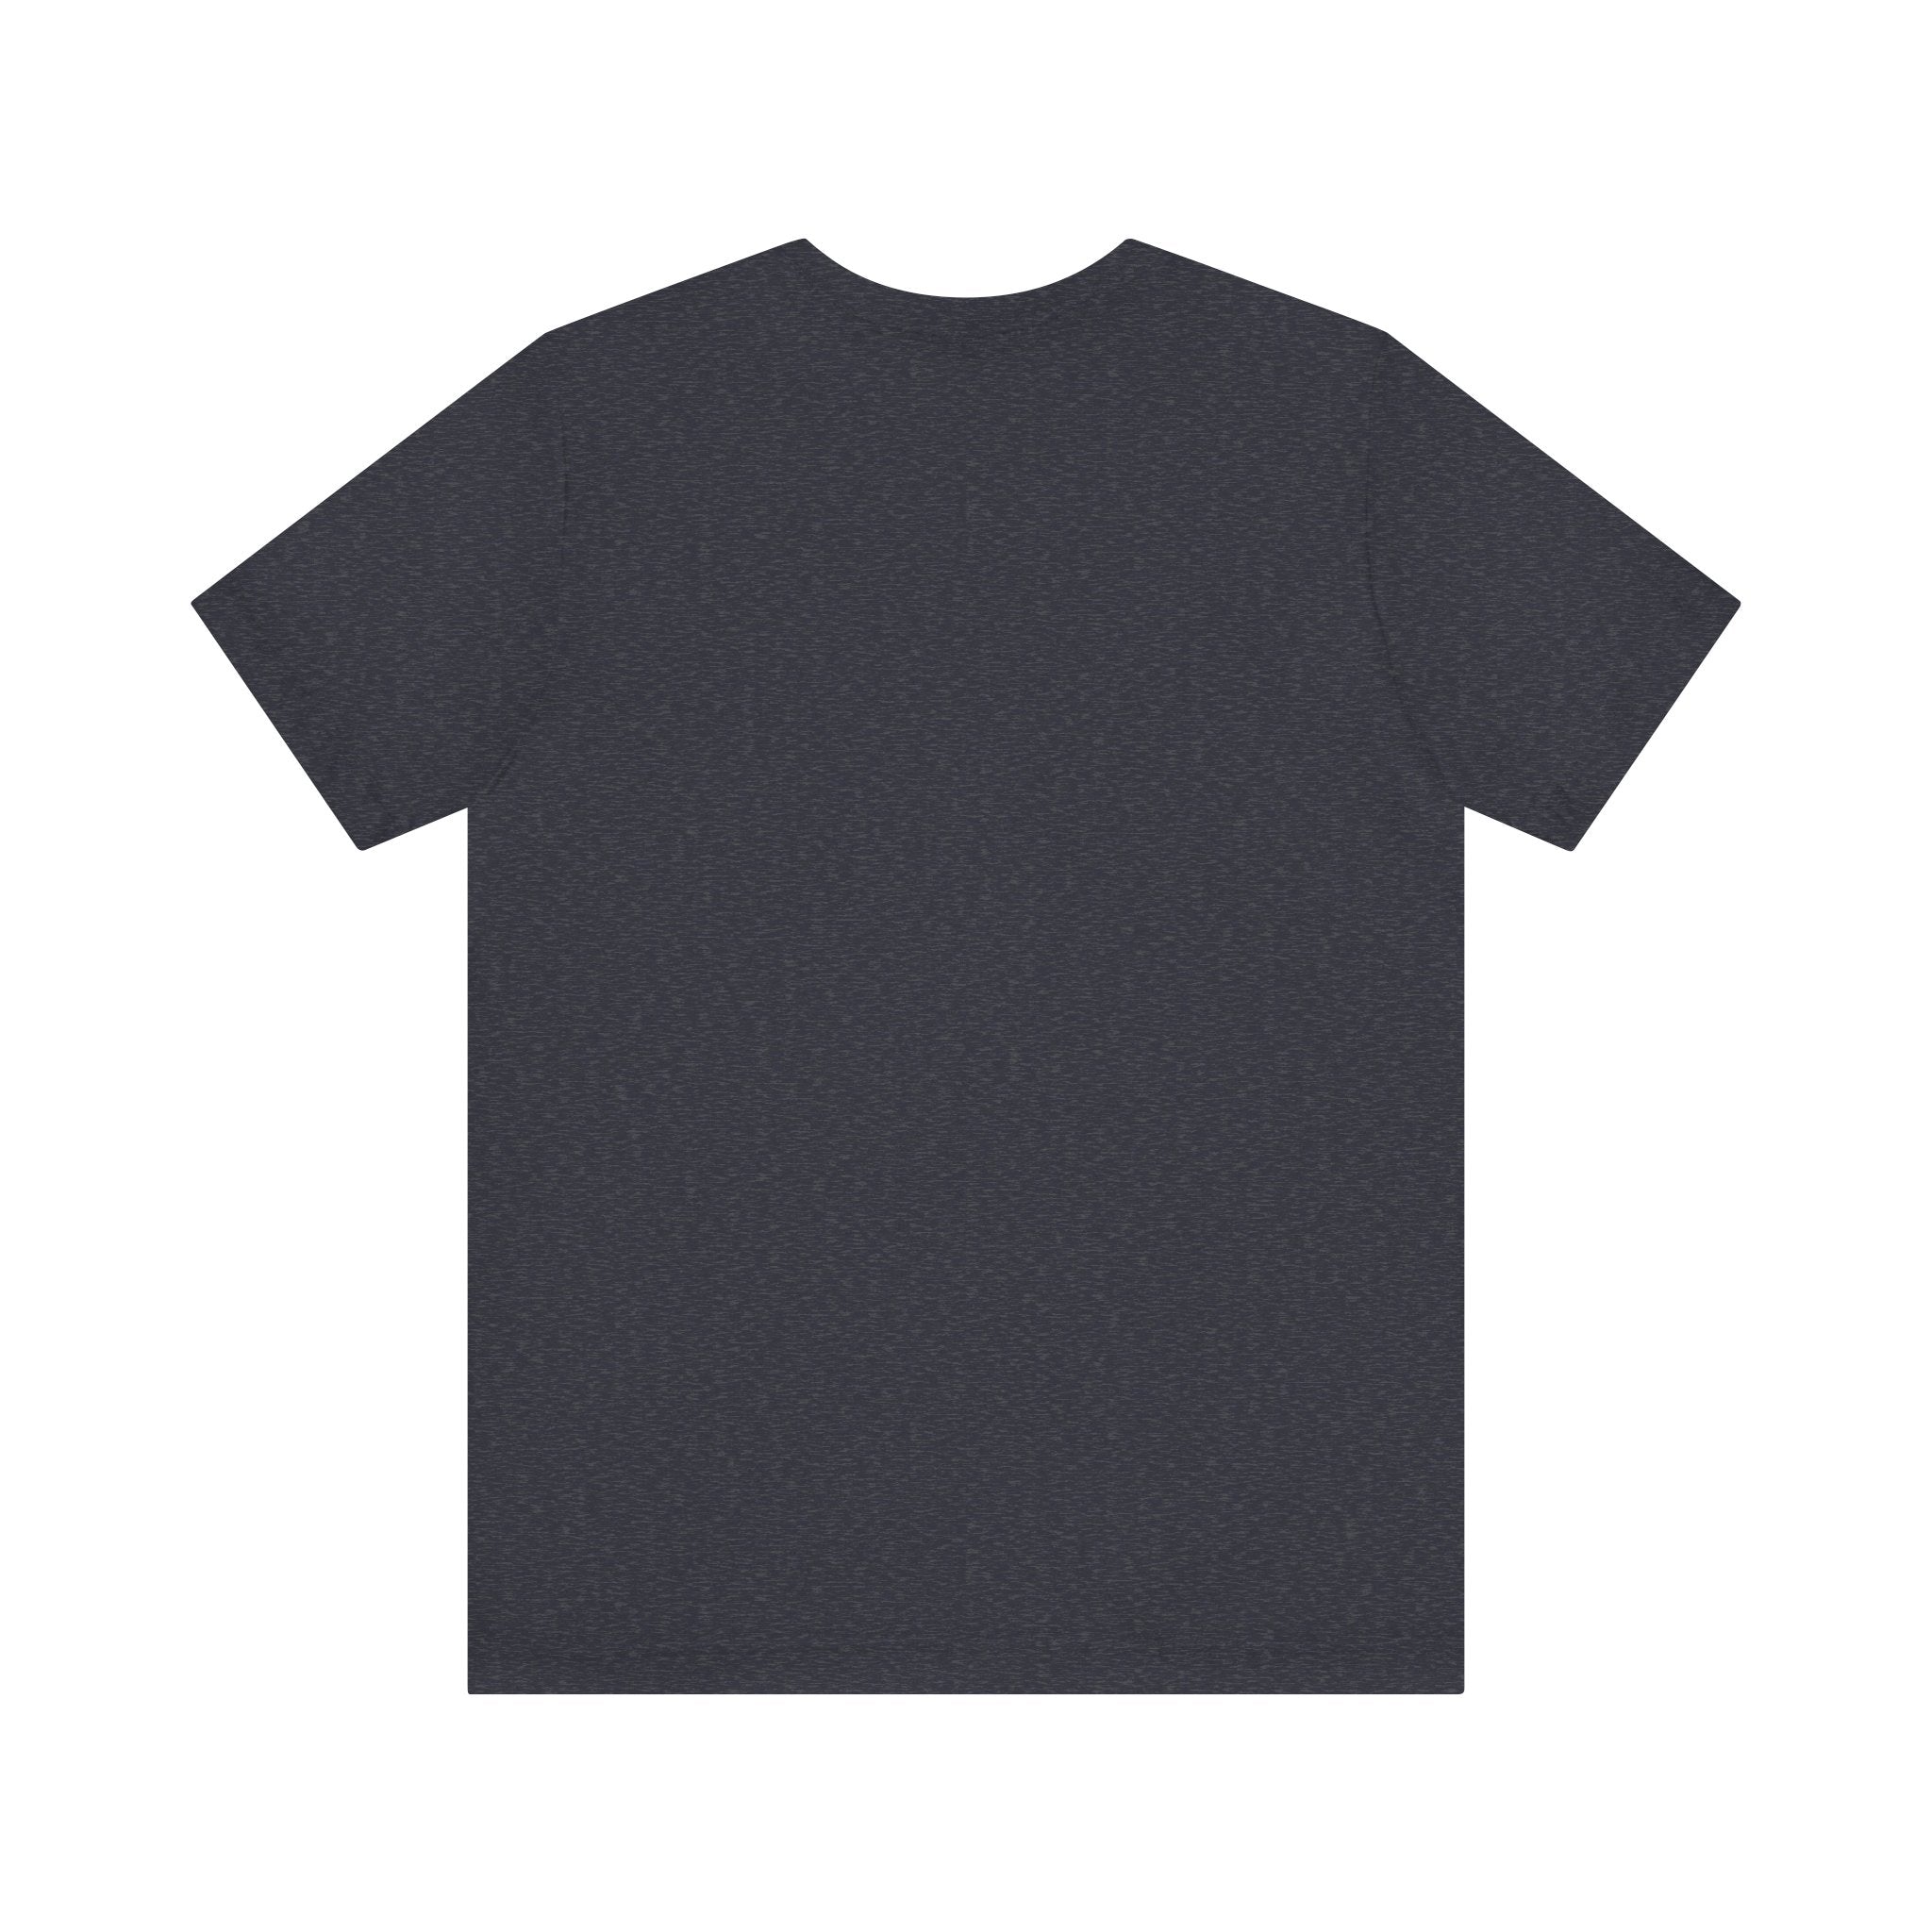 A plain, dark gray short-sleeve C-Ho-Co-La-Te - T-Shirt viewed from the back, displayed against a white background. This fashion staple is made from 100% Airlume cotton for ultimate comfort and quality.